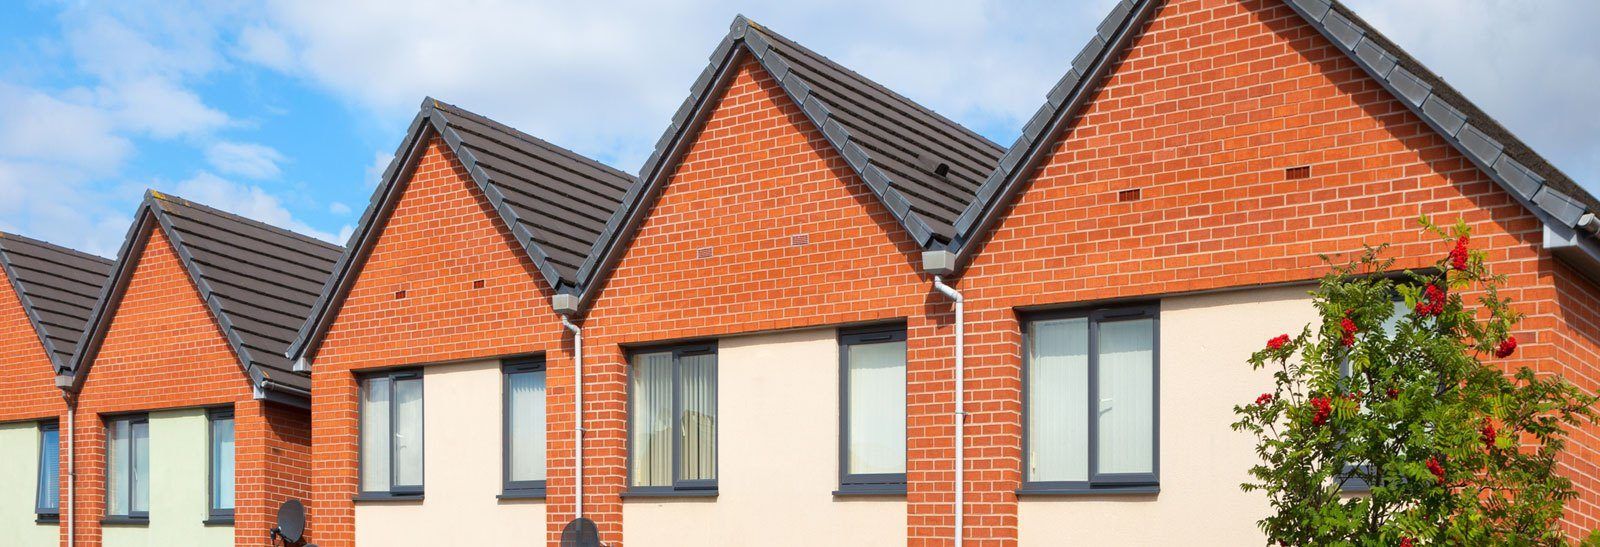 LiveWest launch new affordable housing scheme in Madron